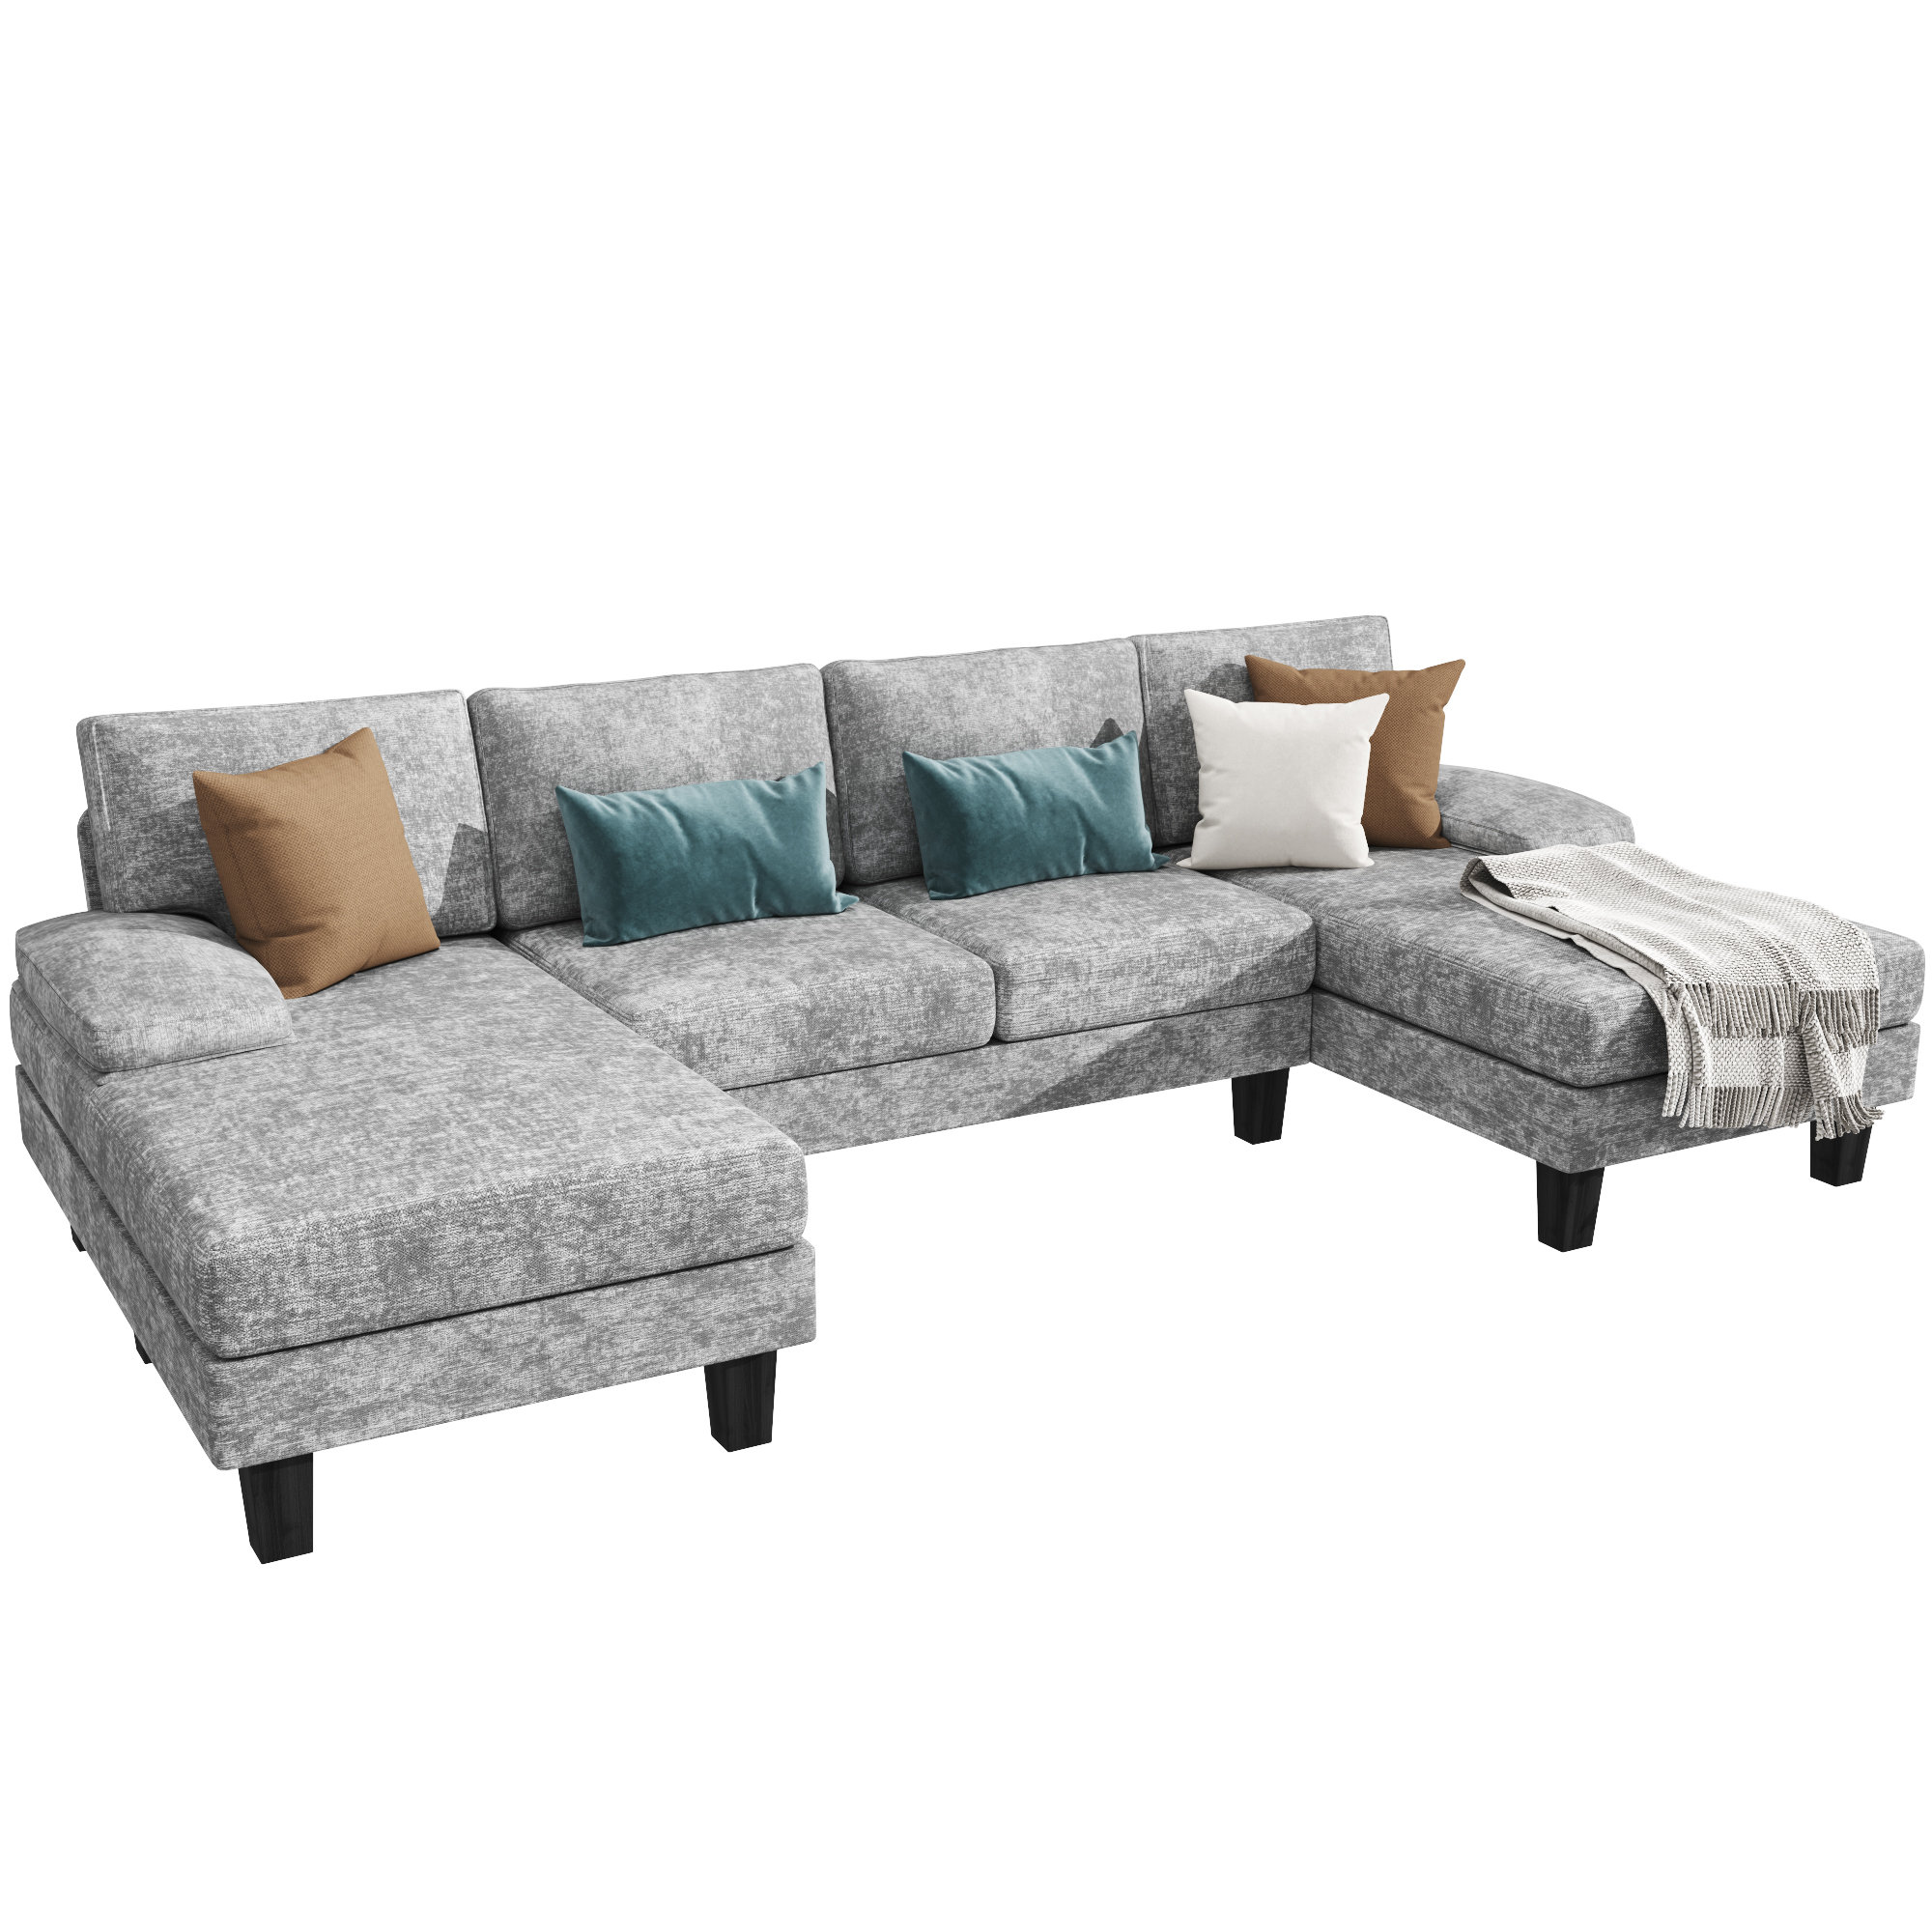 Arbelaez 110.2 Wide Chenille Symmetrical Sofa & Chaise Wade Logan Upholstery Color: Gray Chenille